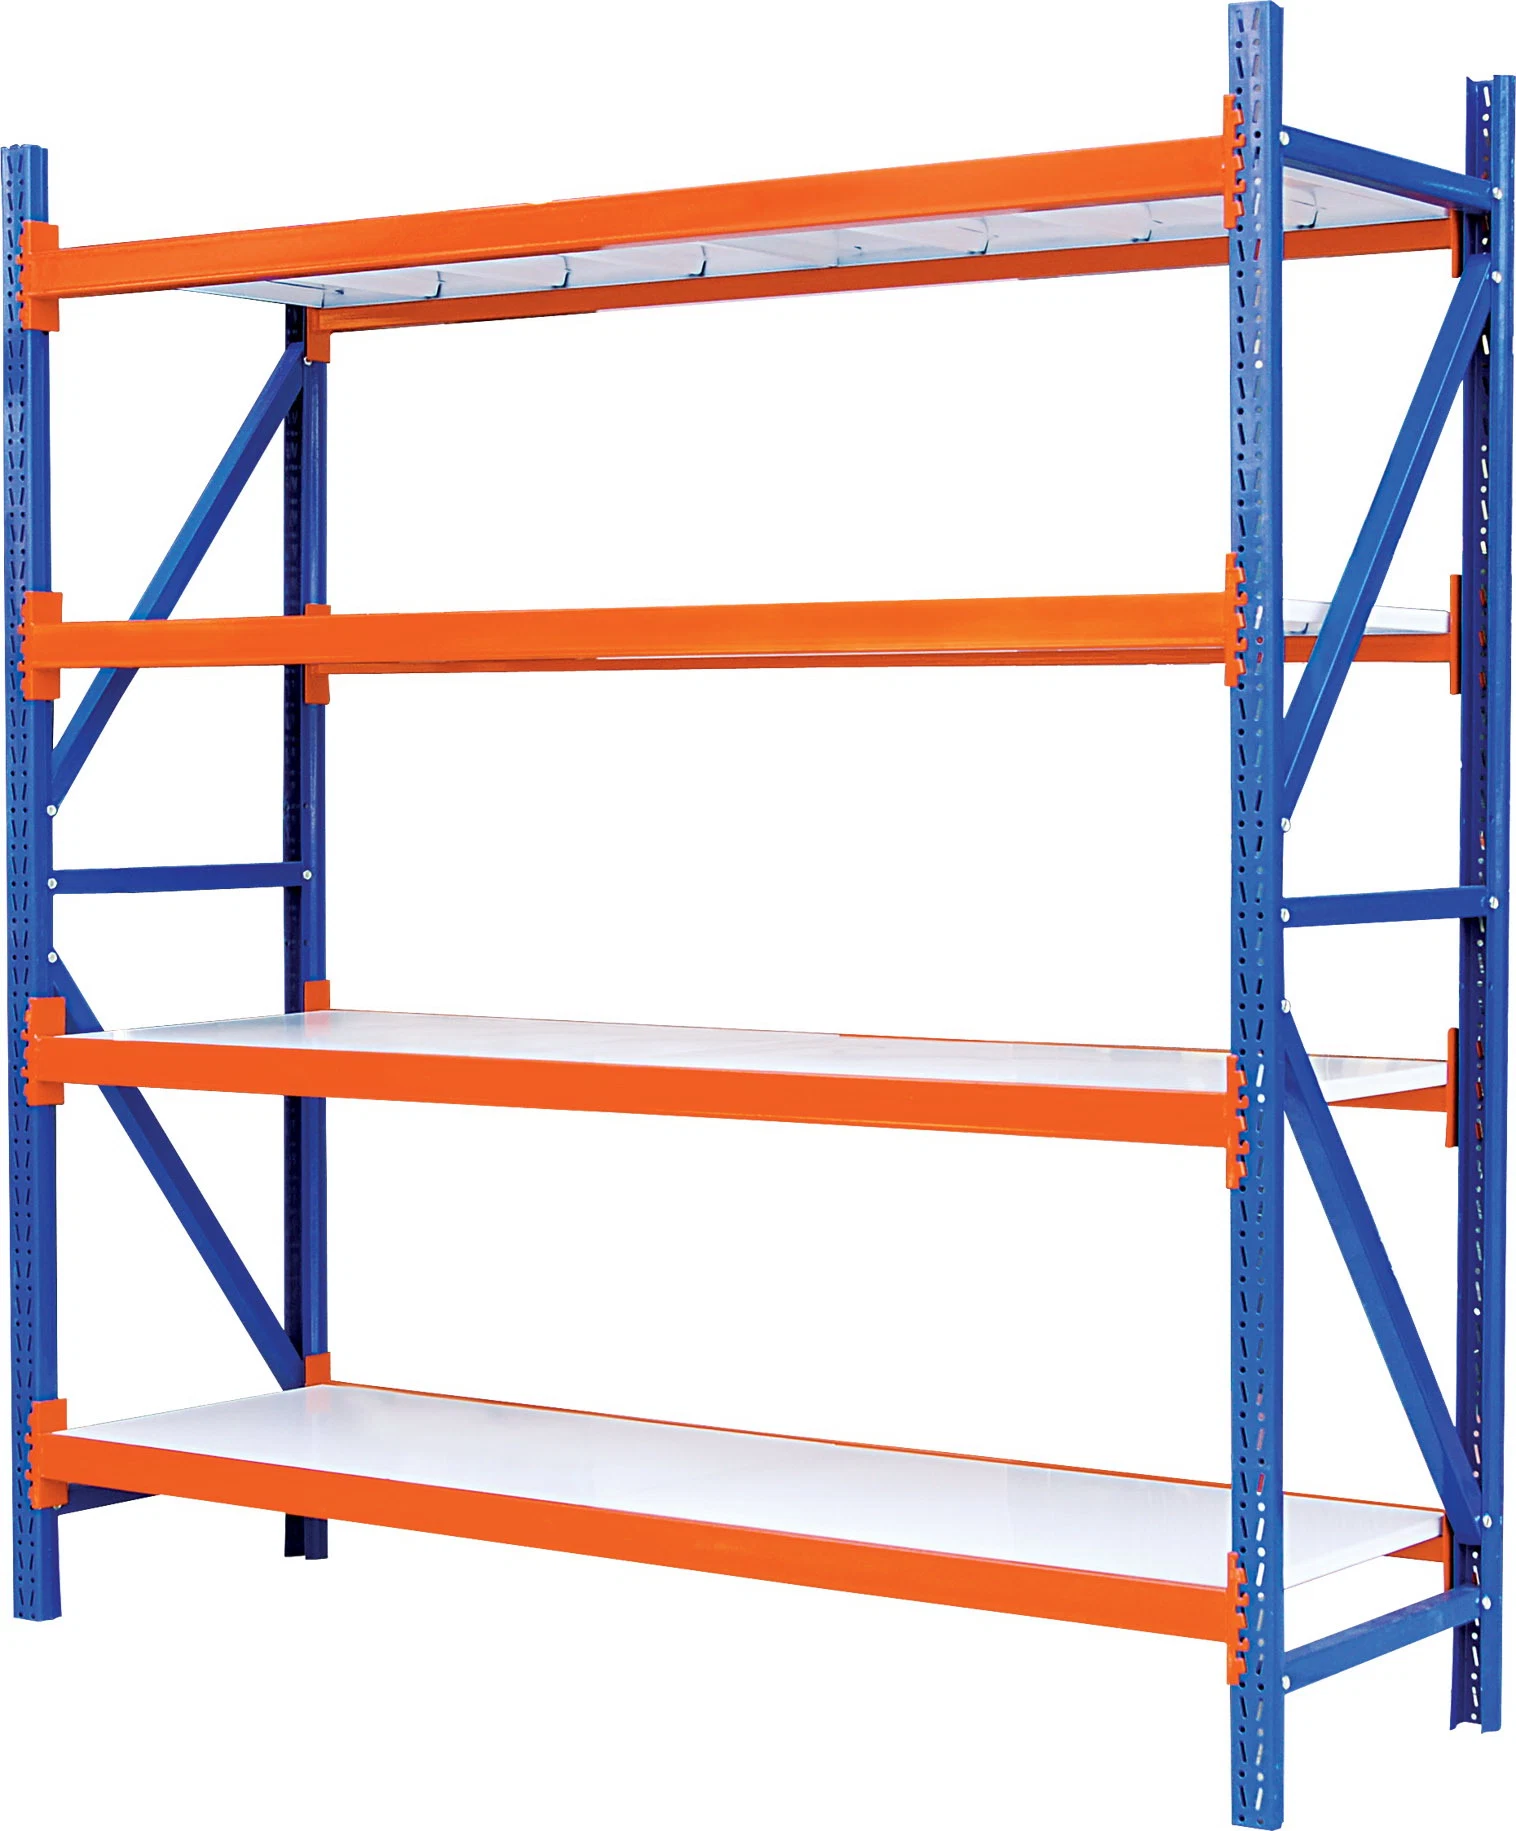 High quality/High cost performance  Steel Display Shelving Heavy Duty Shelves Structure Metal Rack New Warehouse Storage Racks